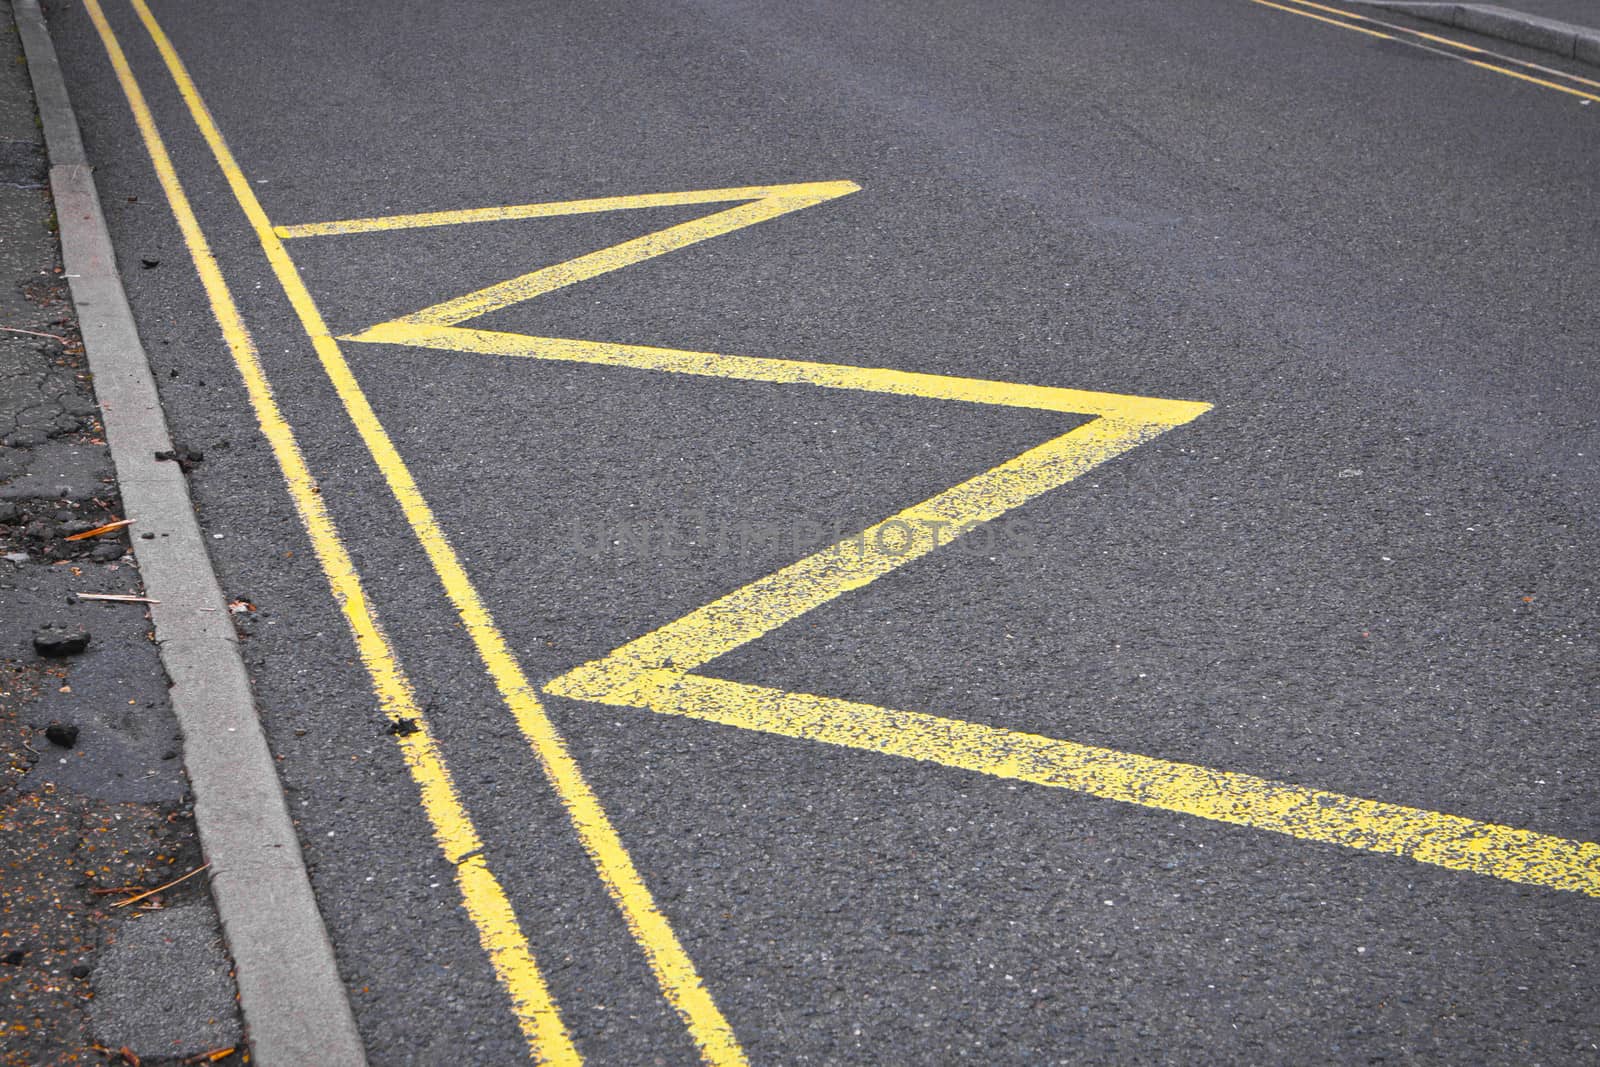 Road markings indicating no stopping or parking